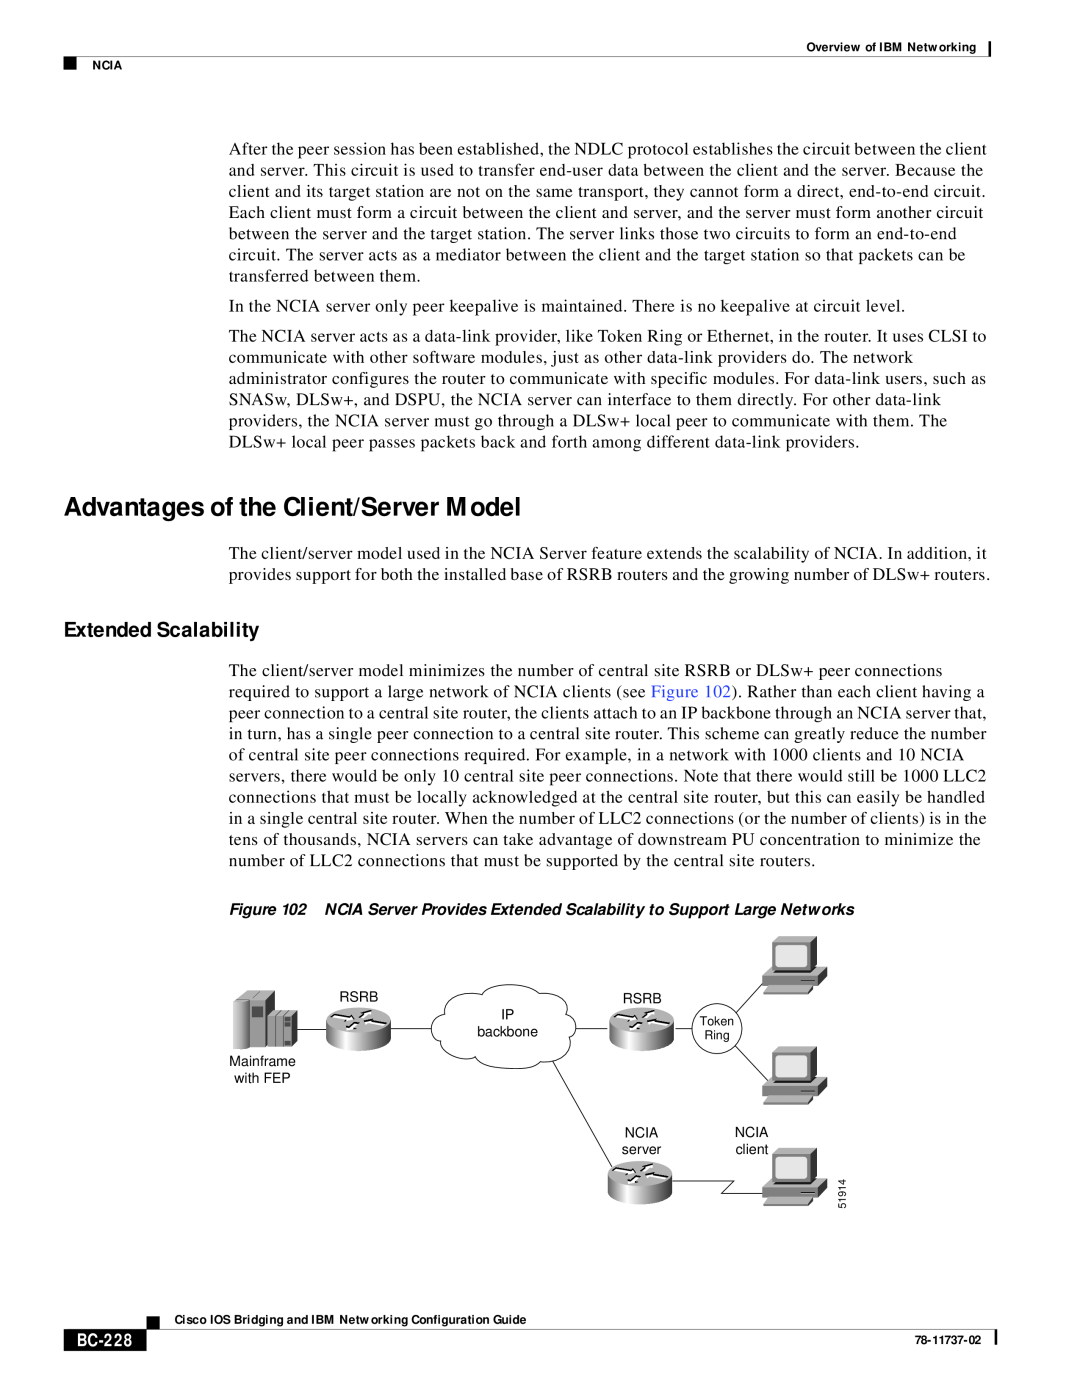 IBM BC-201 manual Advantages of the Client/Server Model, Extended Scalability, BC-228 